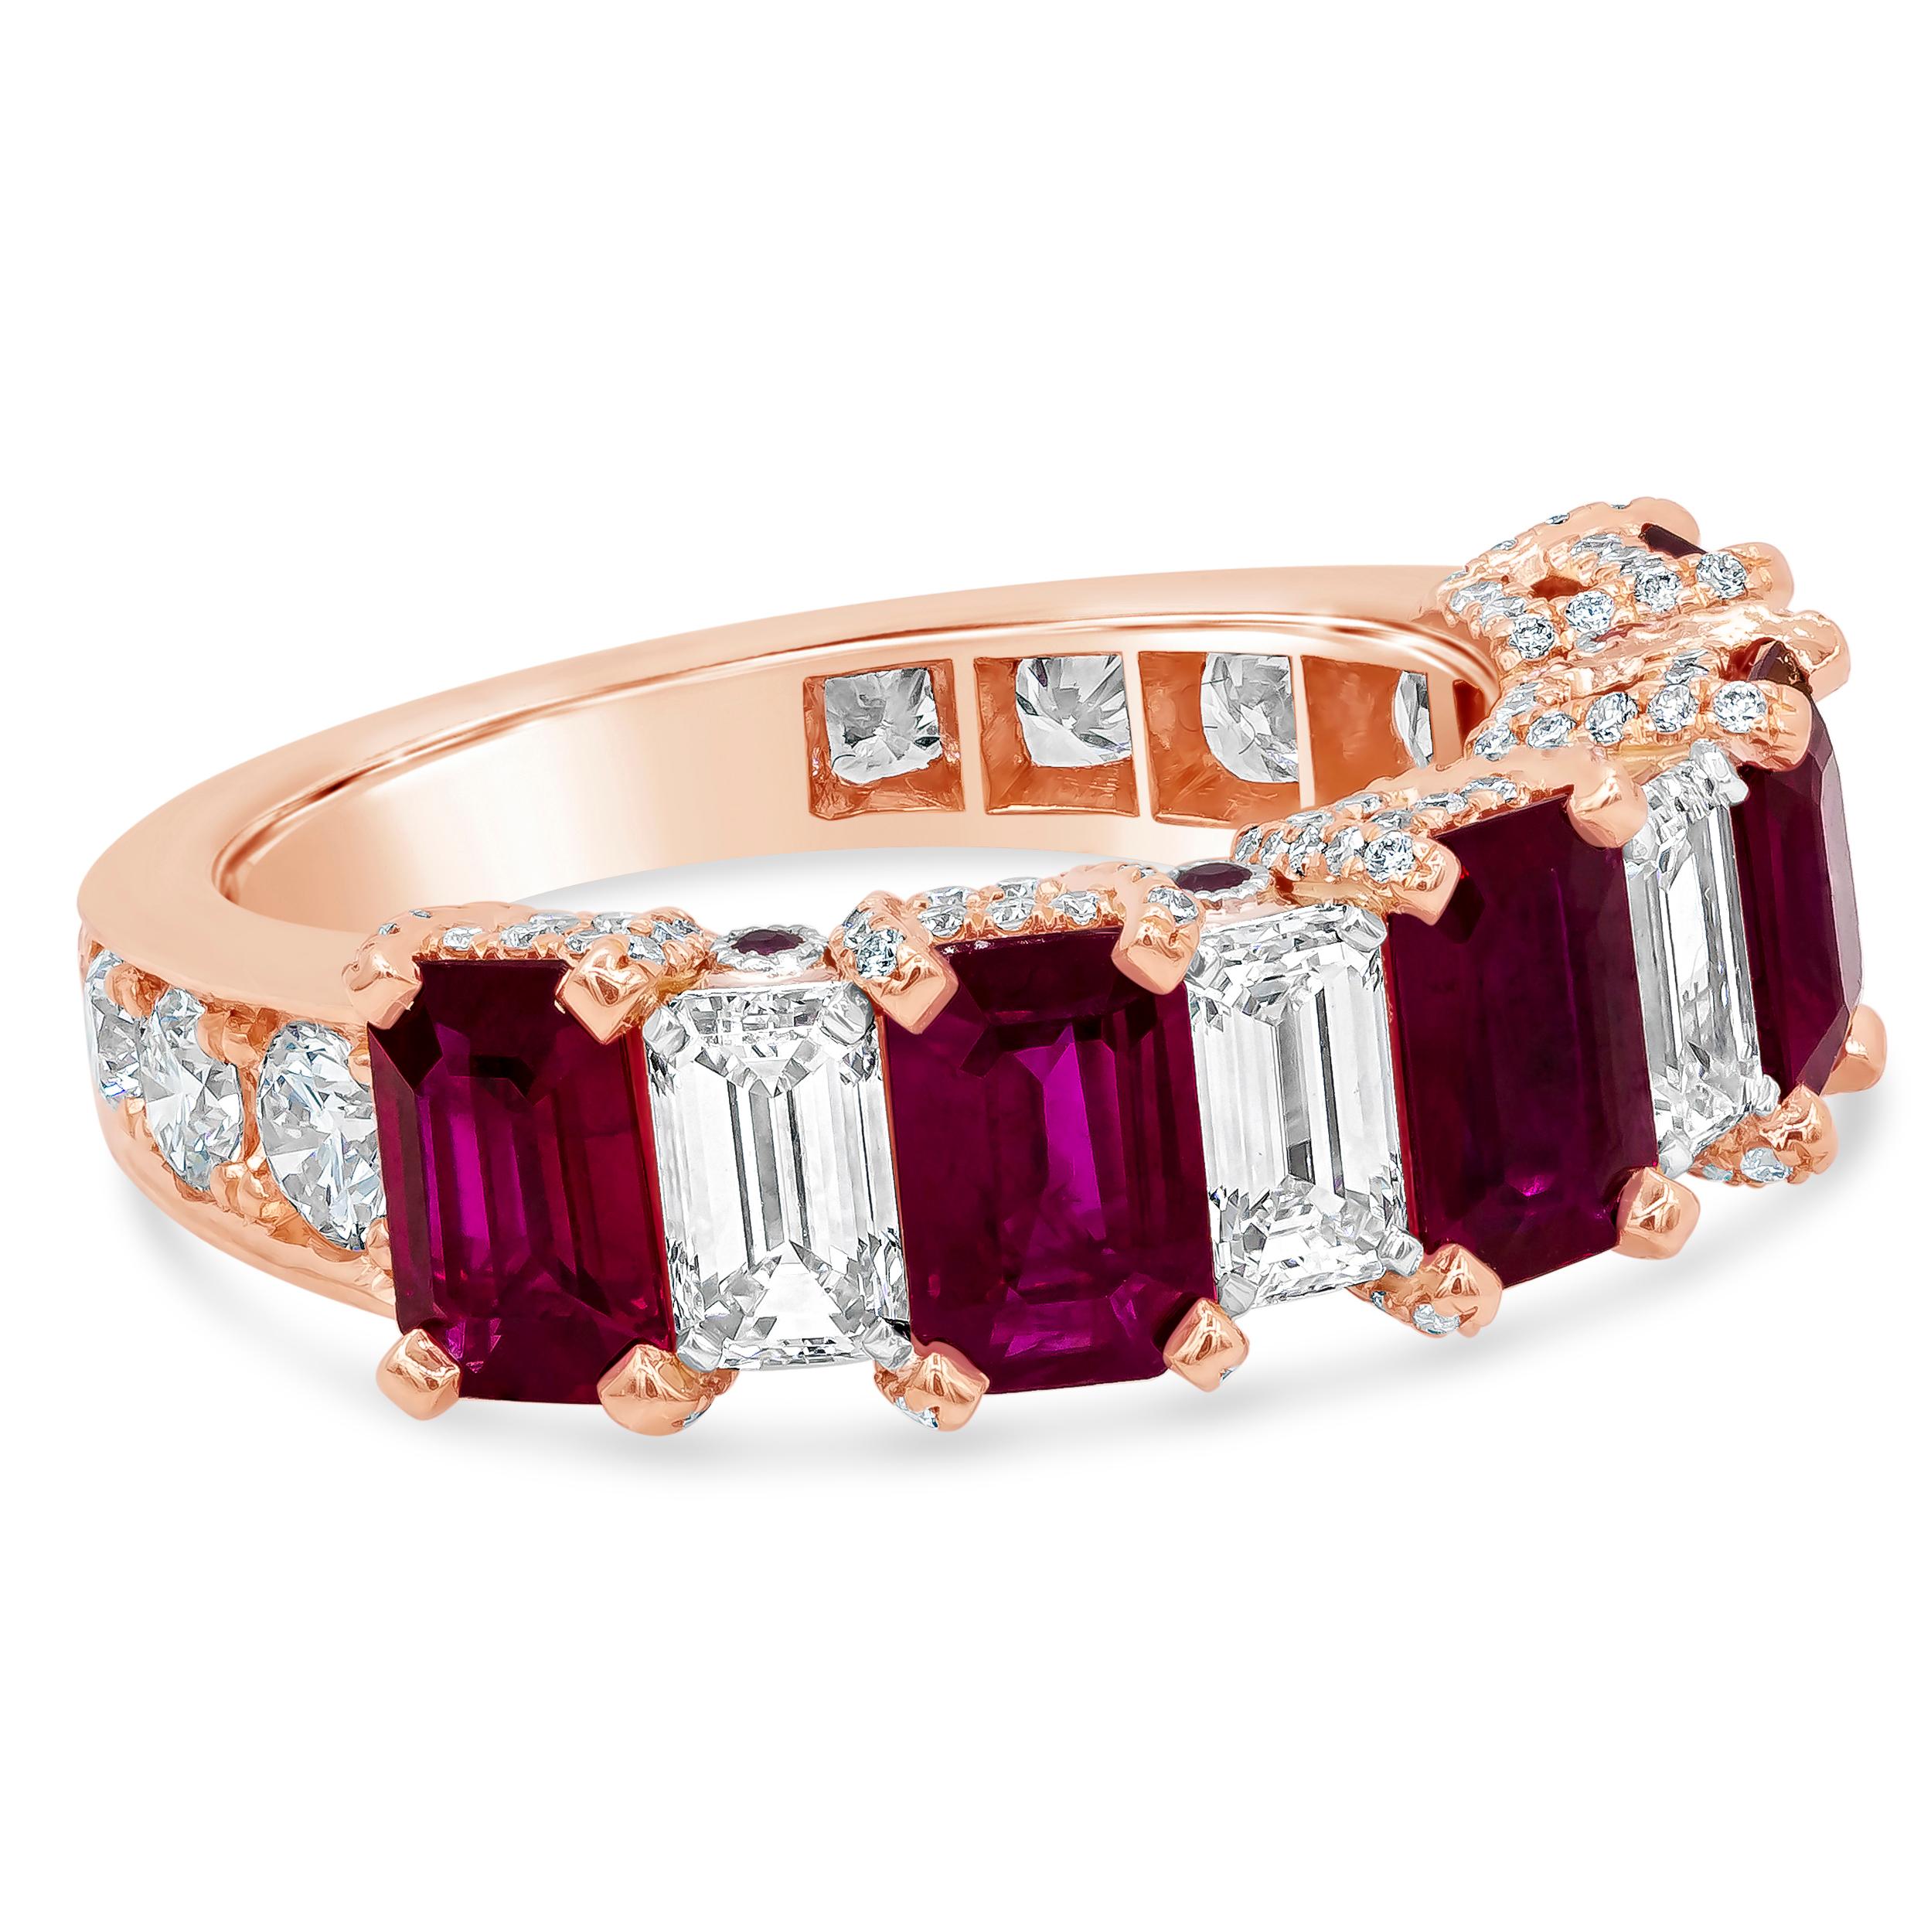 A well-crafted wedding band showcasing a color-rich emerald cut Burmese red rubies that elegantly alternate with emerald cut diamonds. The mounting is encrusted with brilliant diamonds in half eternity setting.  Rubies weigh 2.63 carats total and